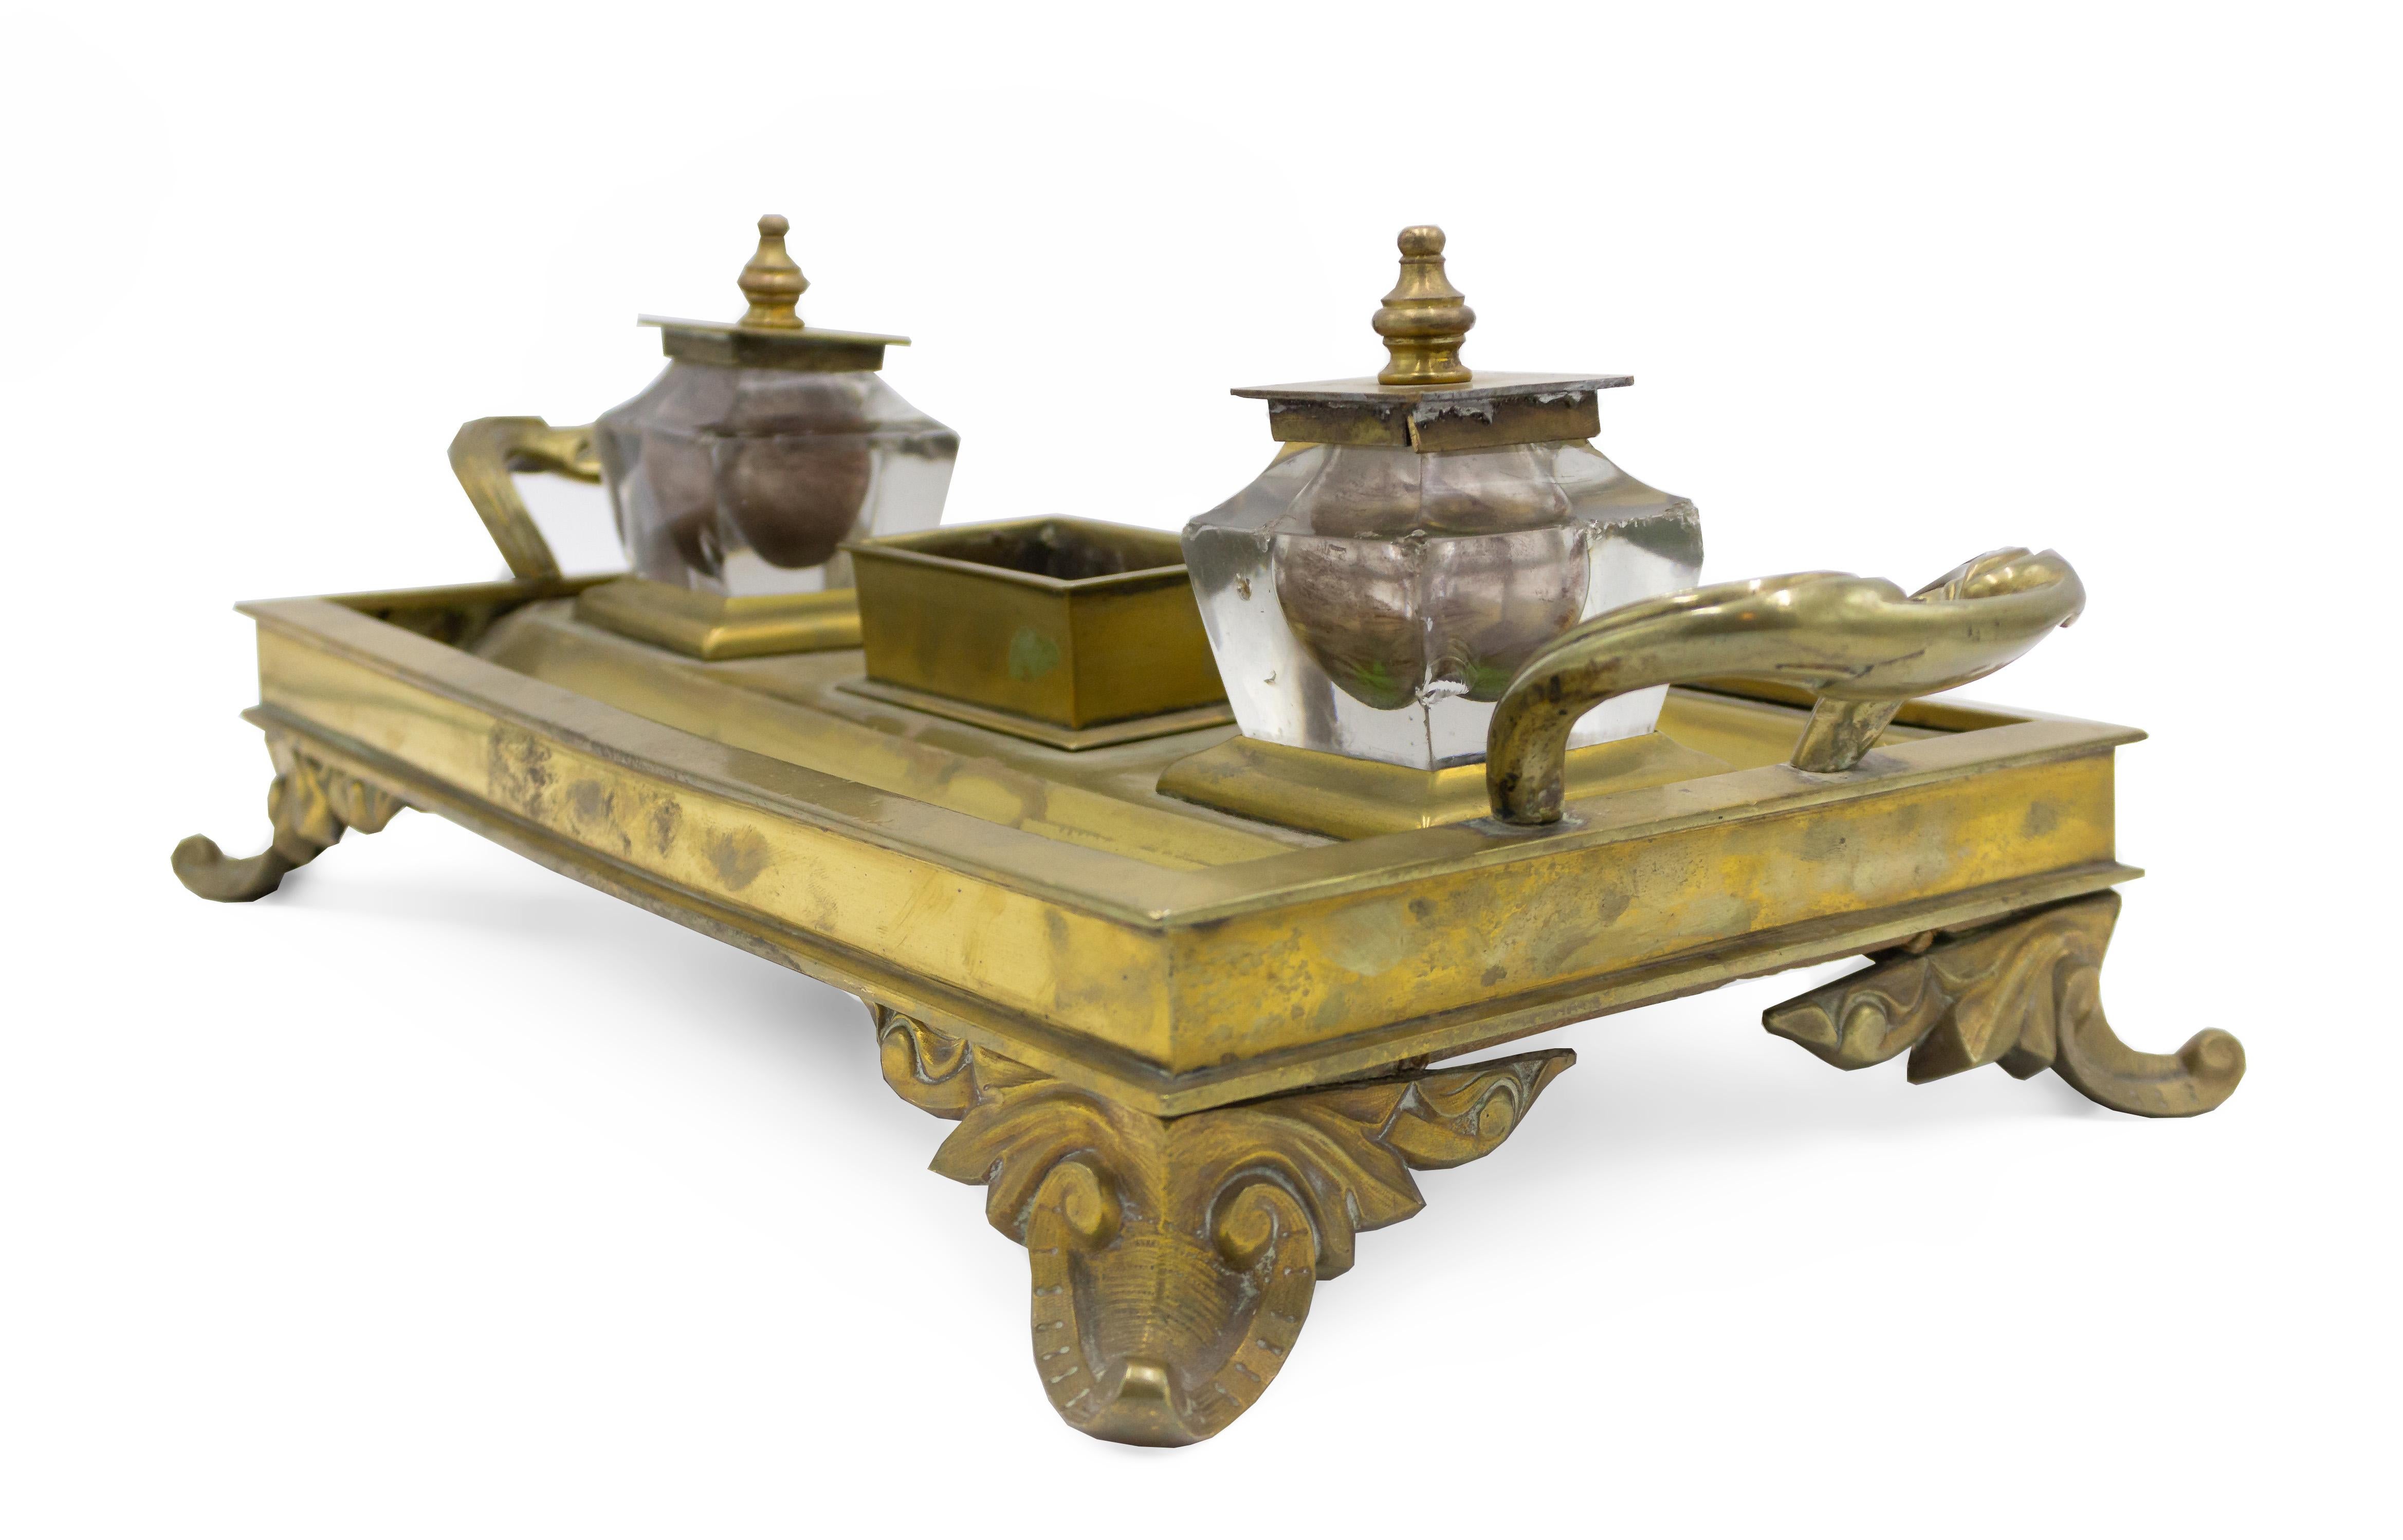 English Victorian bronze inkwell with 2 crystal wells with finial tops and side handles on 4 scroll legs.
 